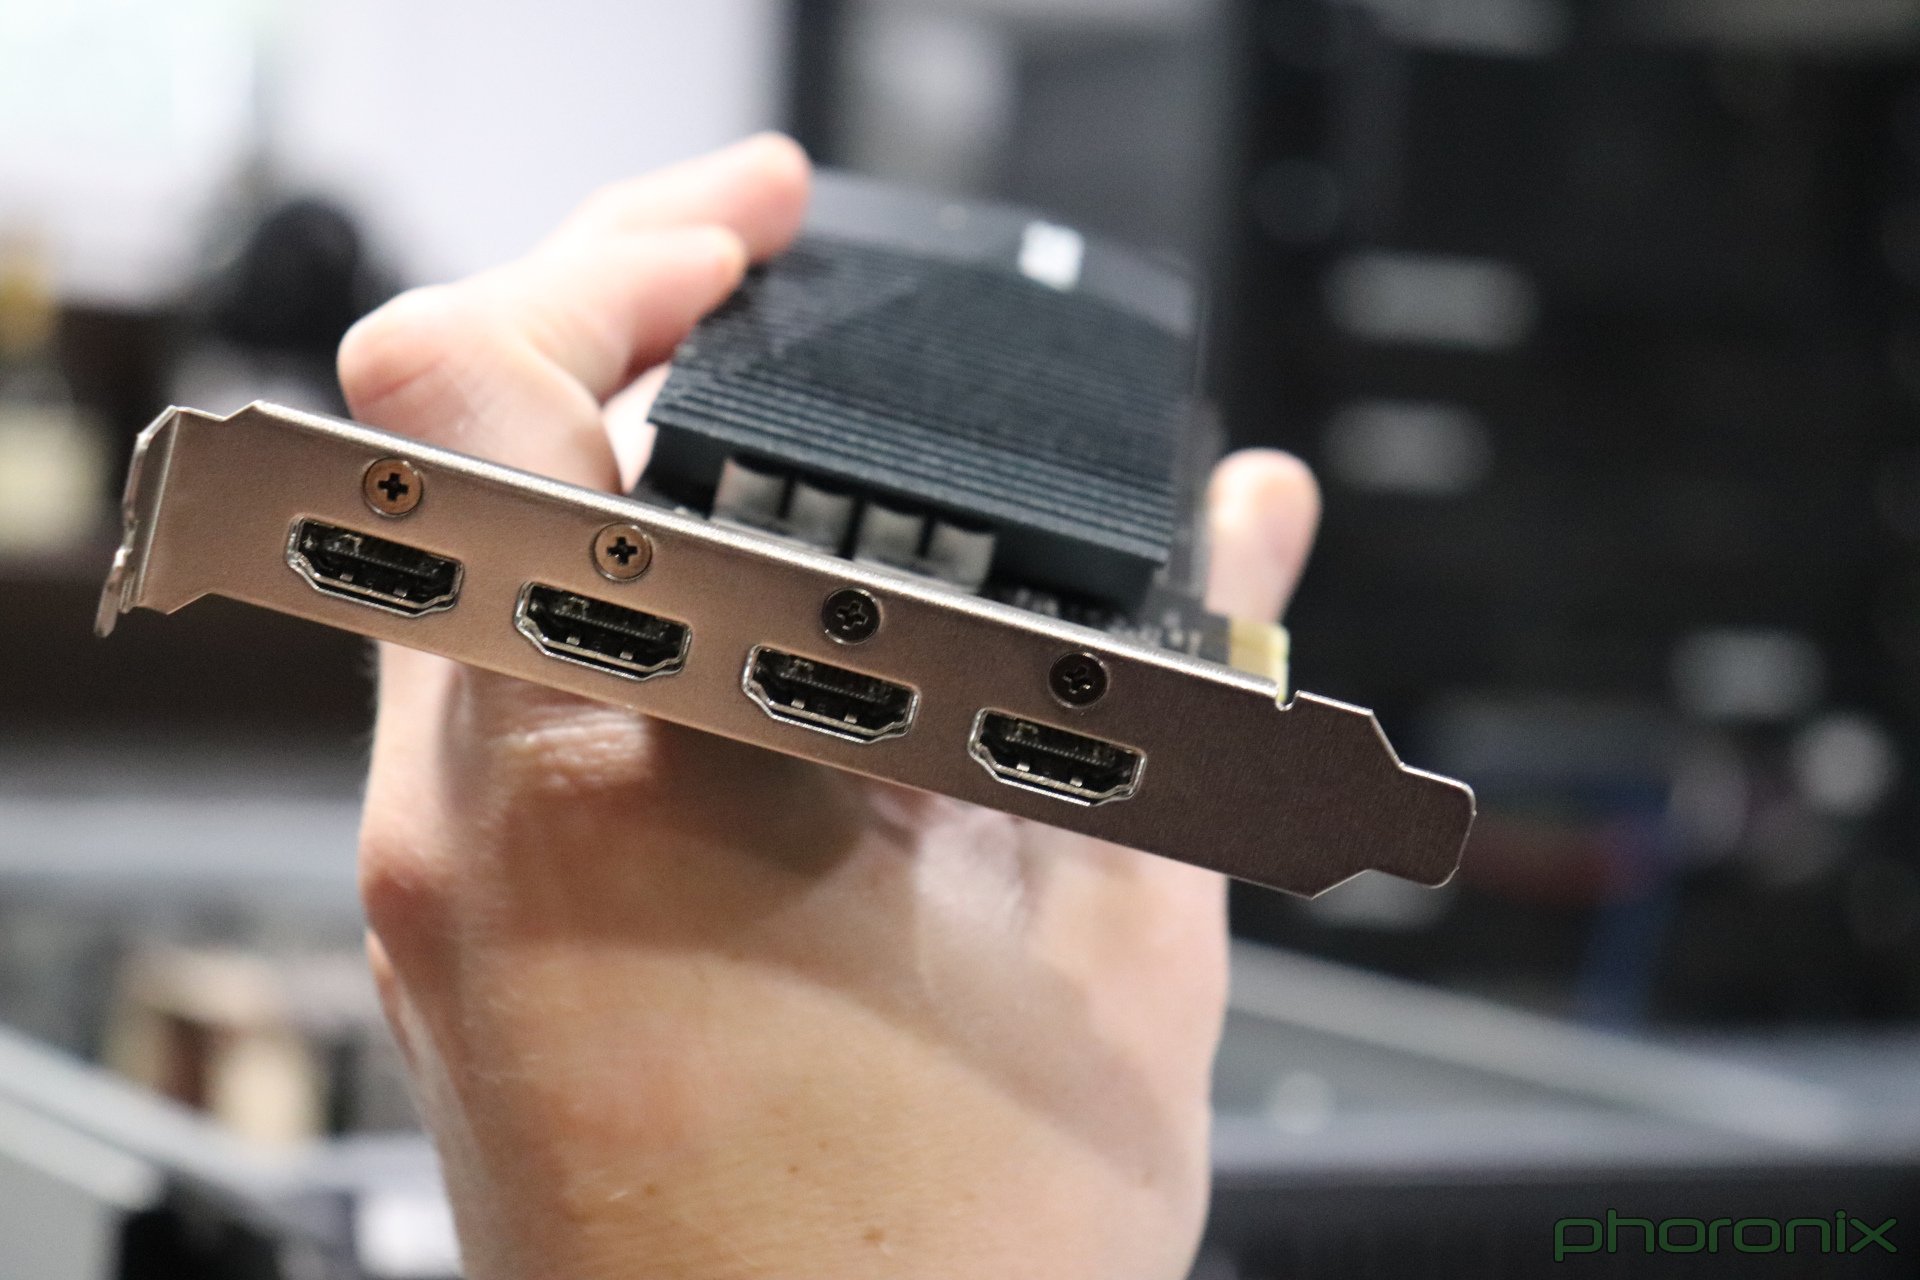 ASUS Launches An Old GPU: The NVIDIA GT 710 with Four 4K HDMI Ports